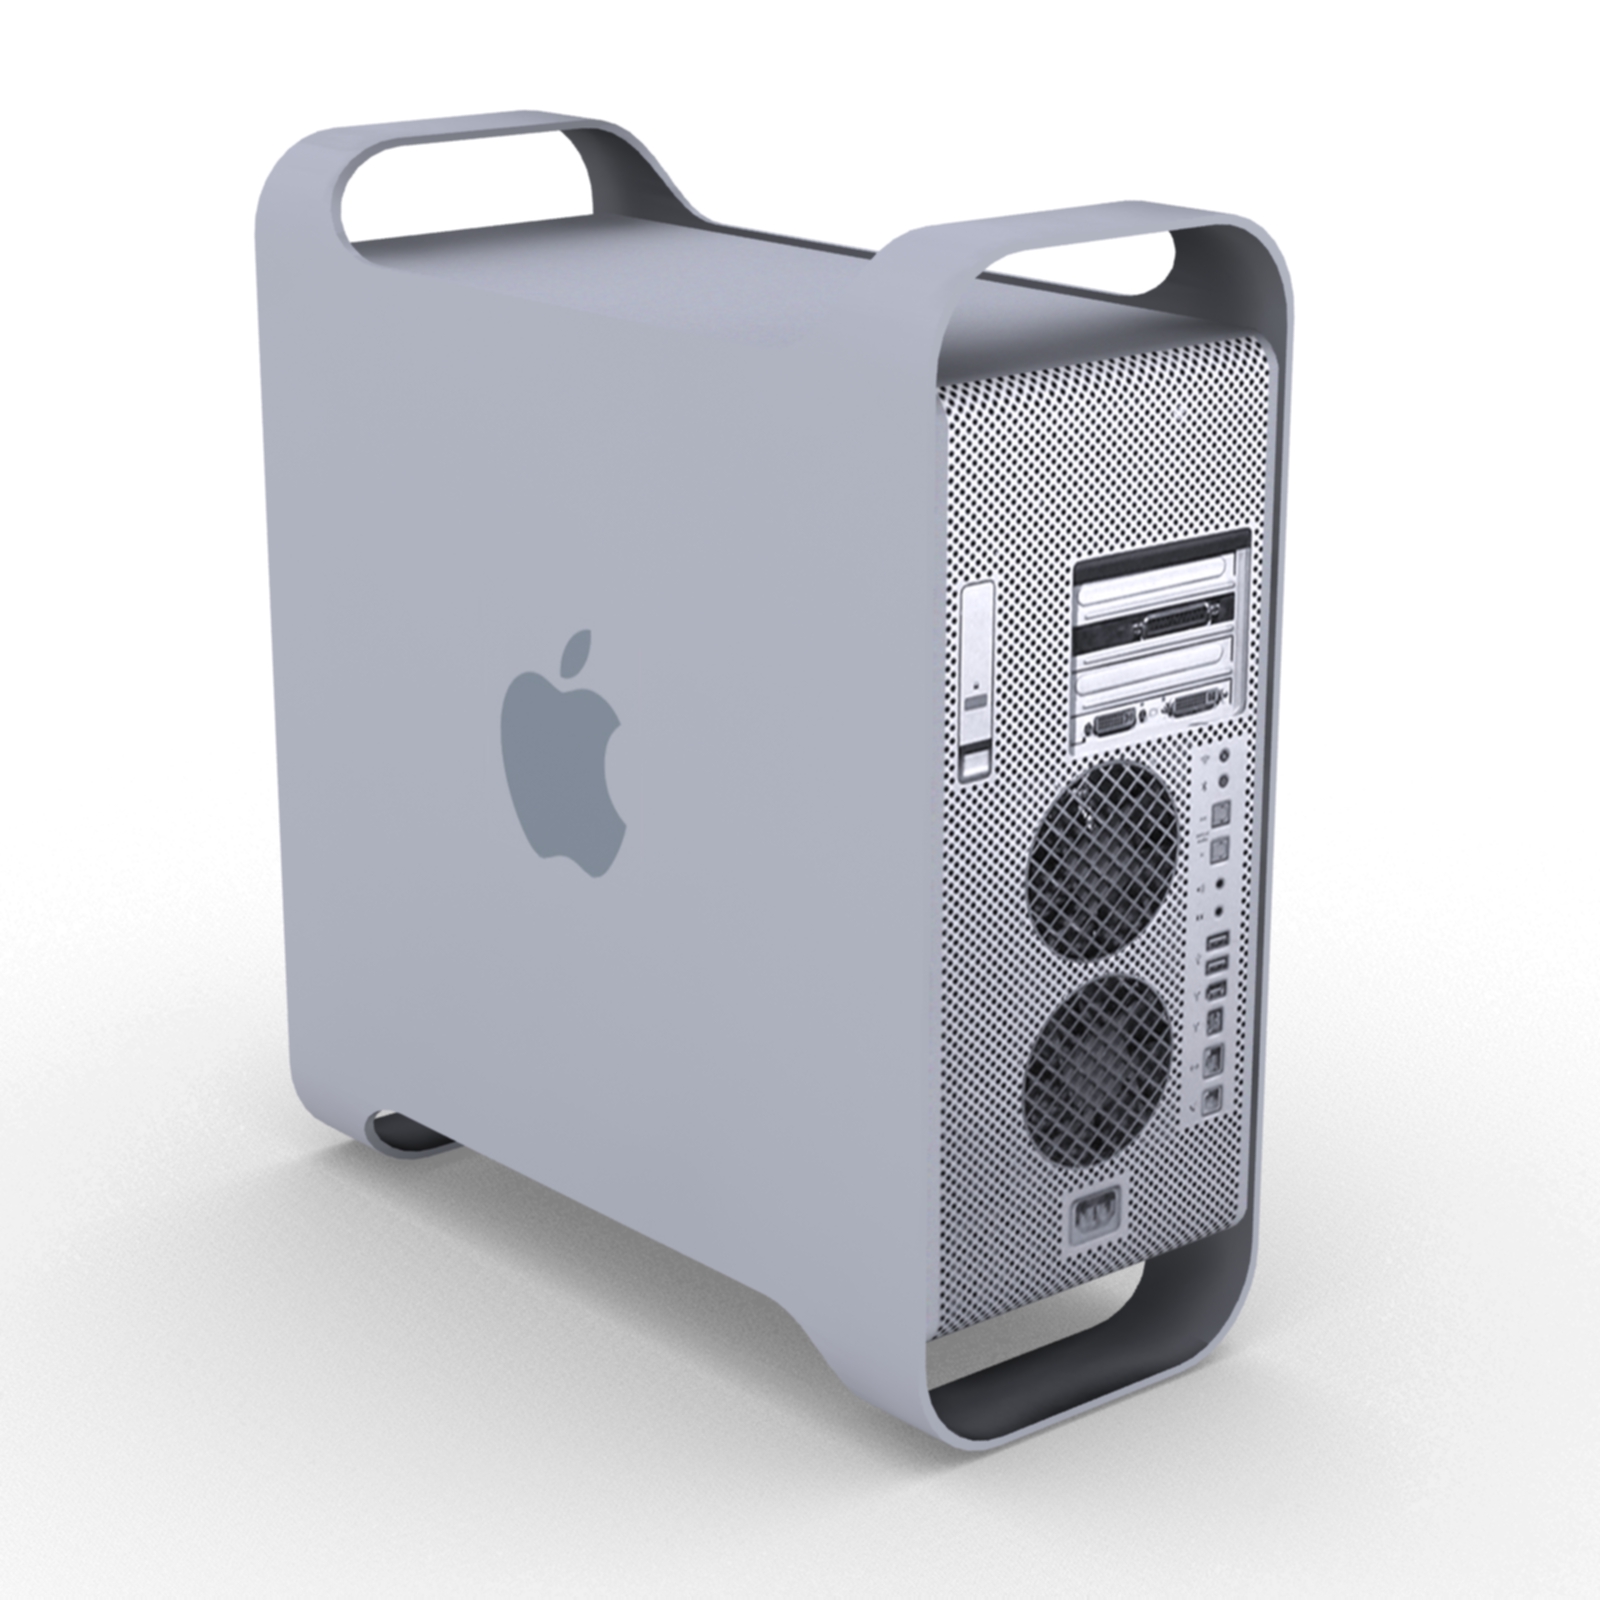 power mac g5 for video editing